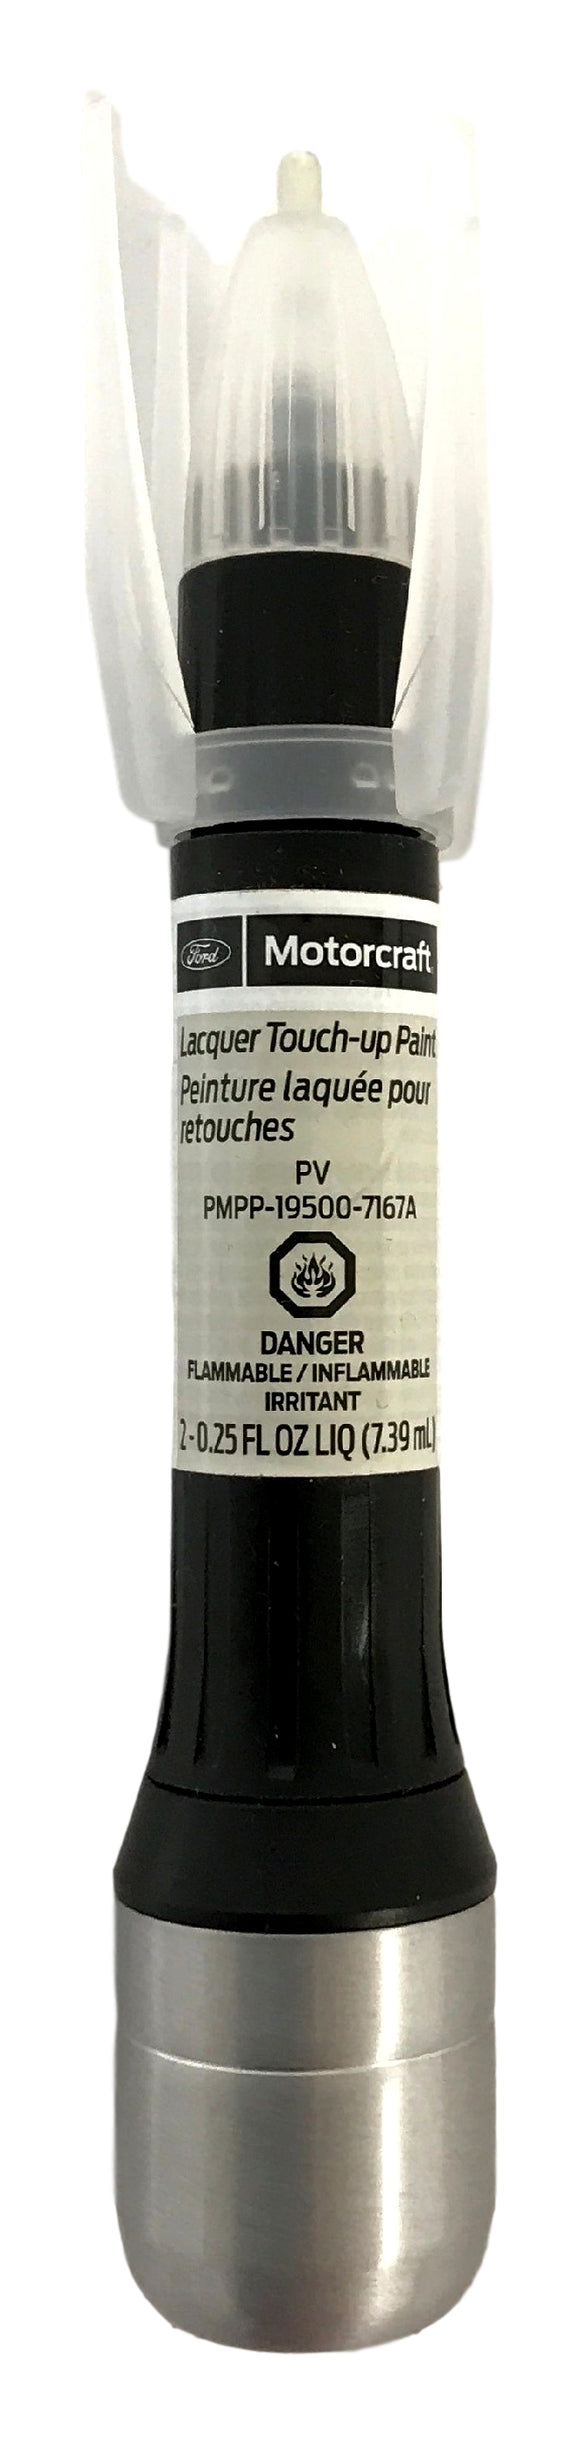 Genuine Ford Motorcraft PMPP-19500-7167A Touch-Up Paint PMPP195007167A